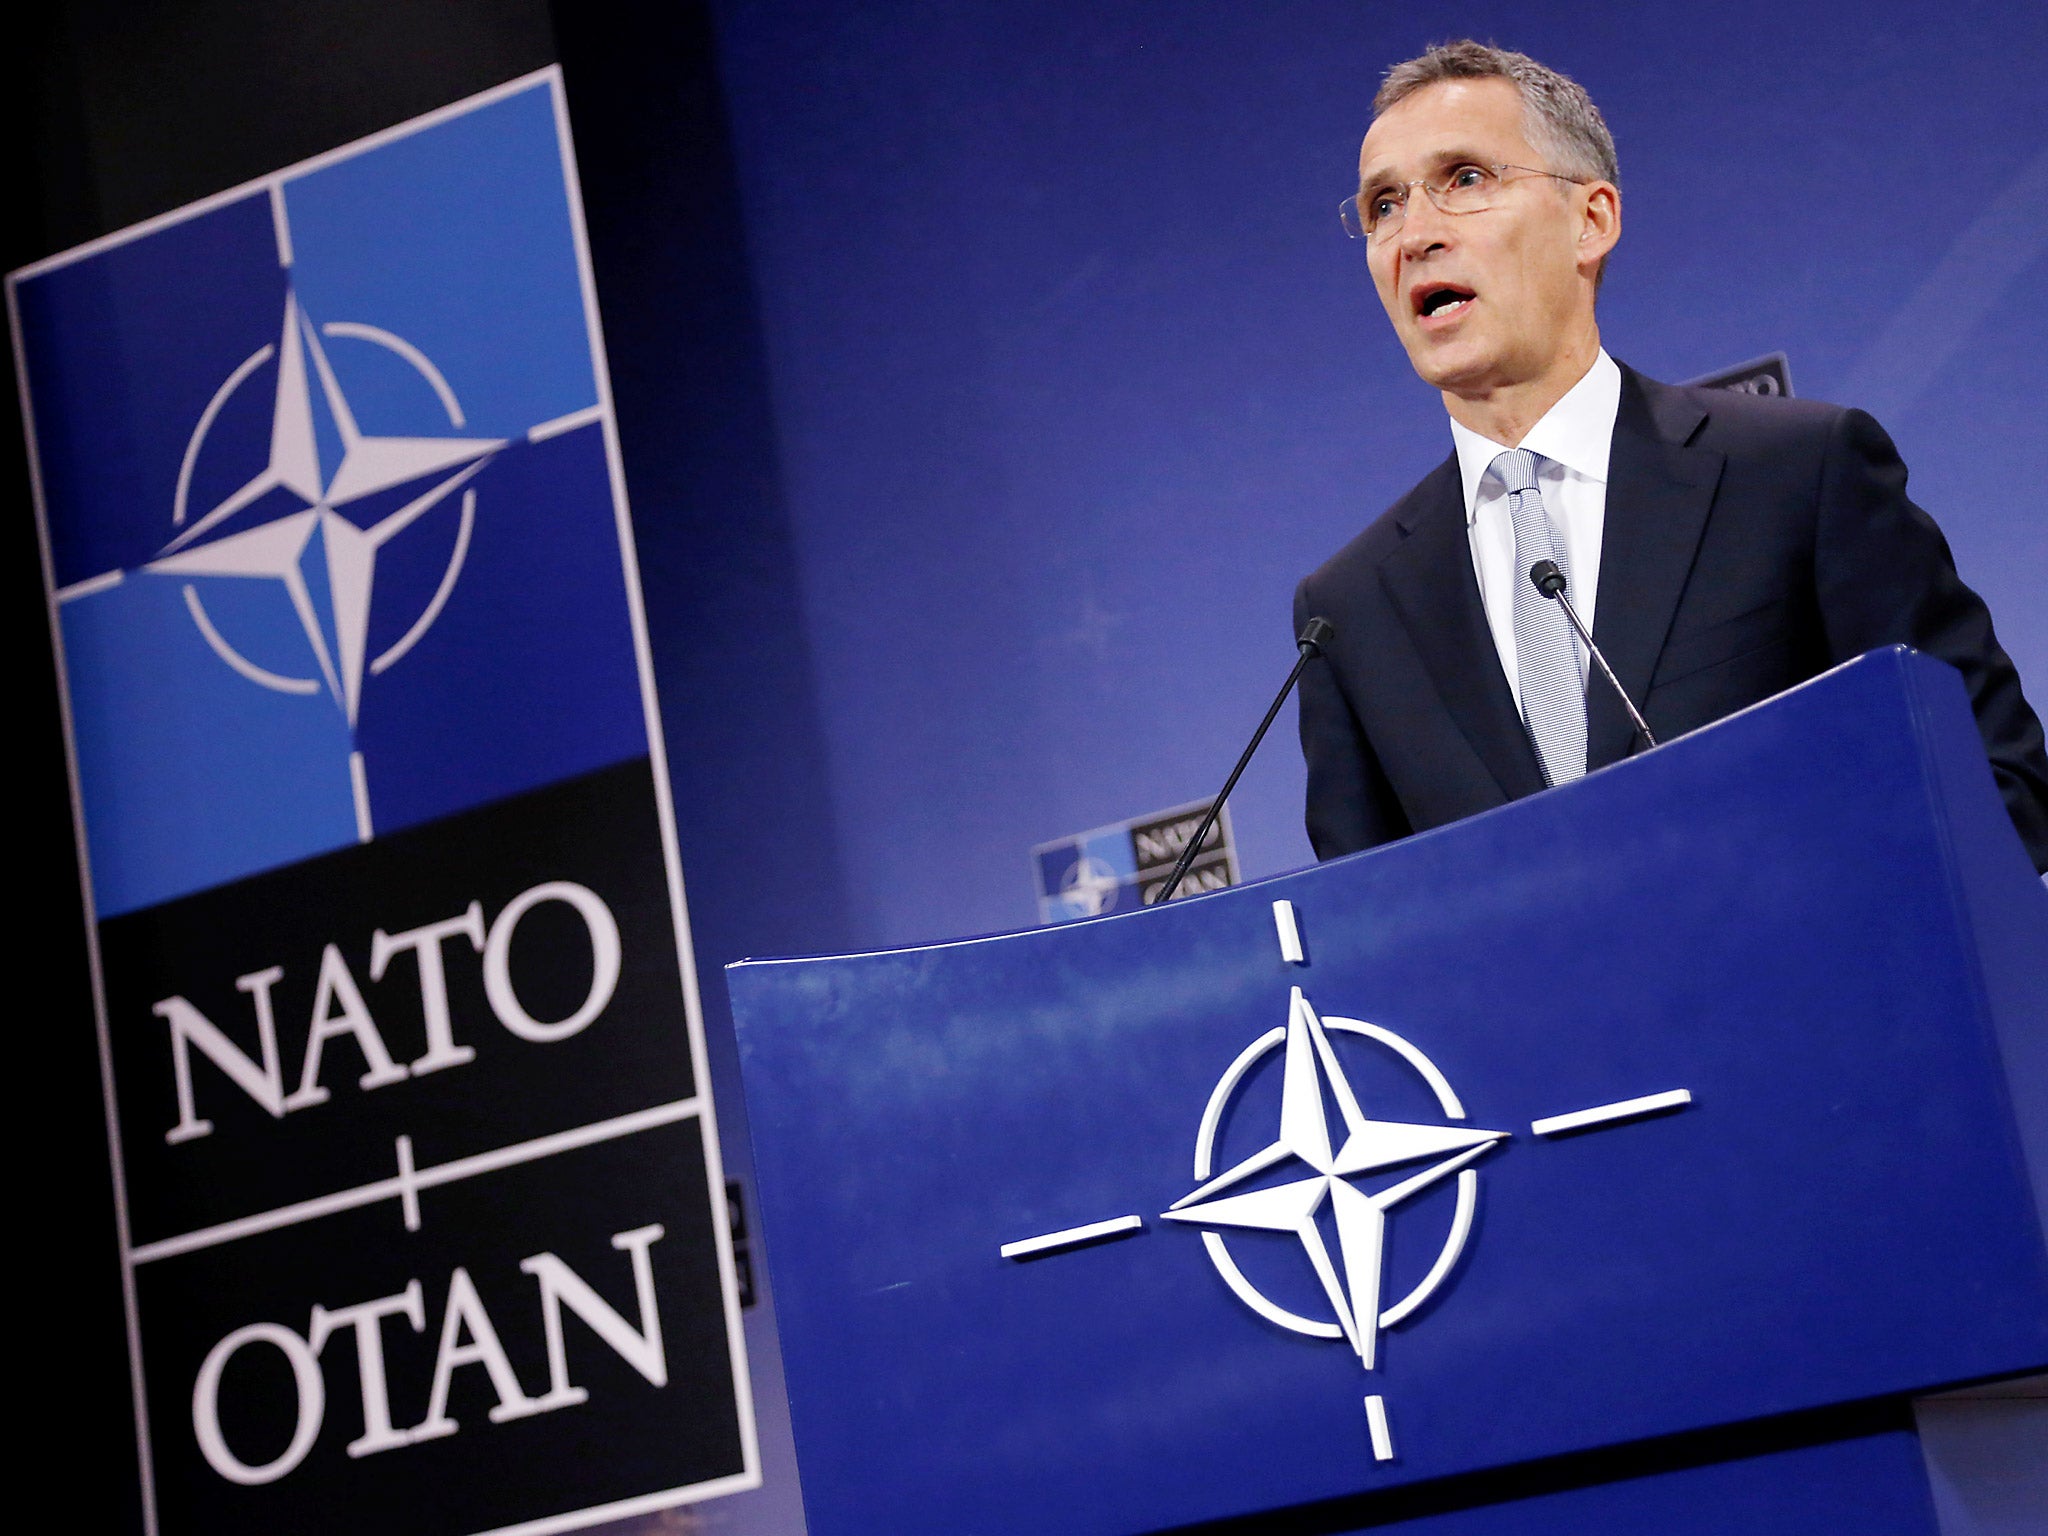 NATO Secretary-General Jens Stoltenberg speaks during a news conference at the Alliance headquarters in Brussels, Belgium